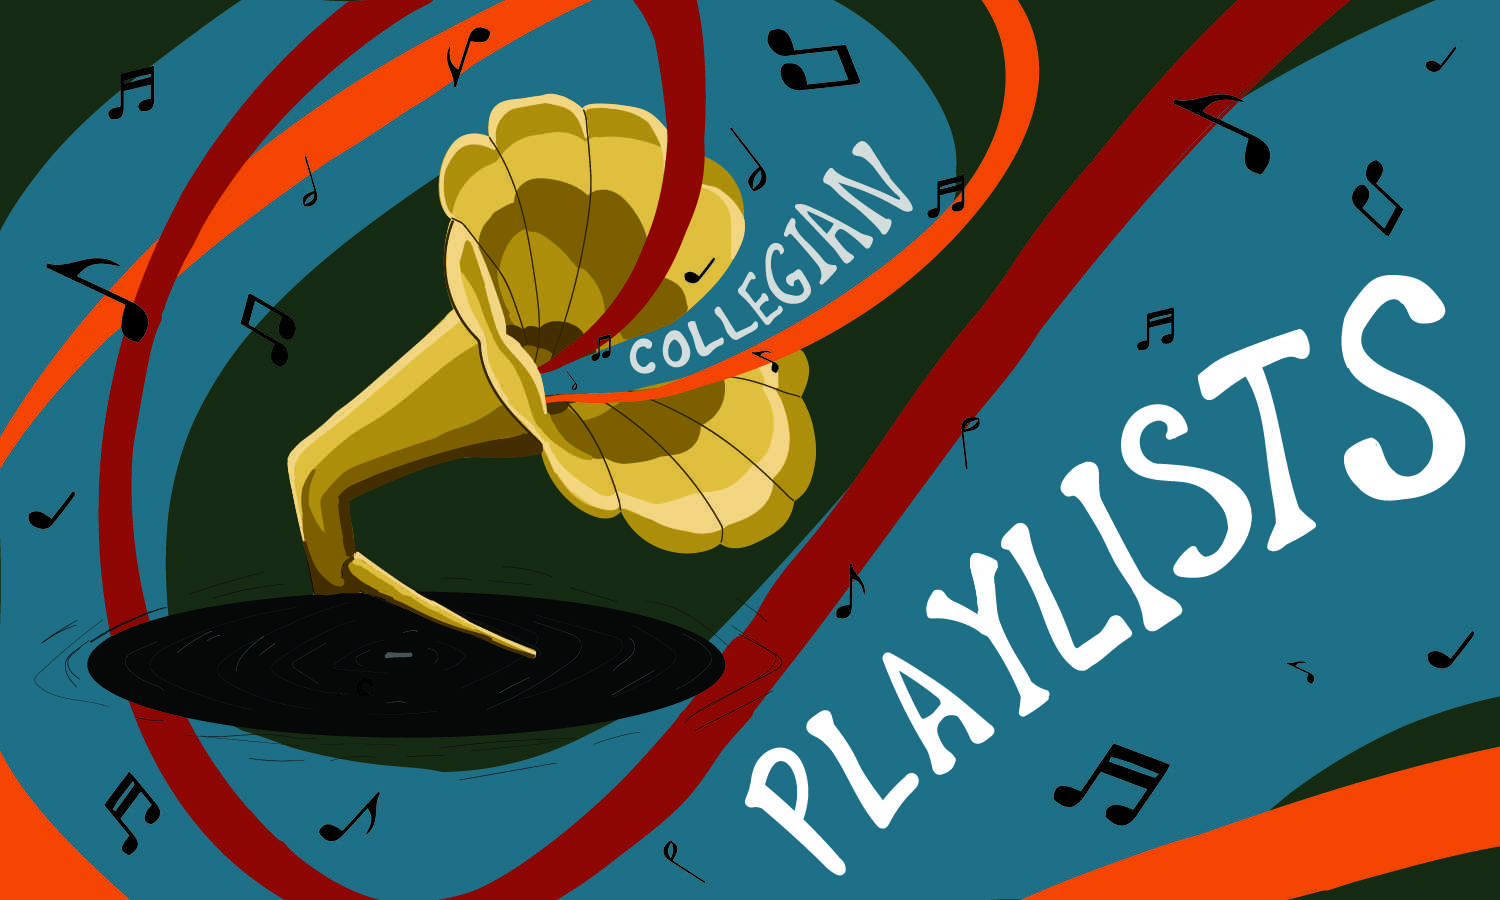 A graphic depicting a gramophone playing music with he words "Collegian Playlists" coming out of it. Music notes float around in the space